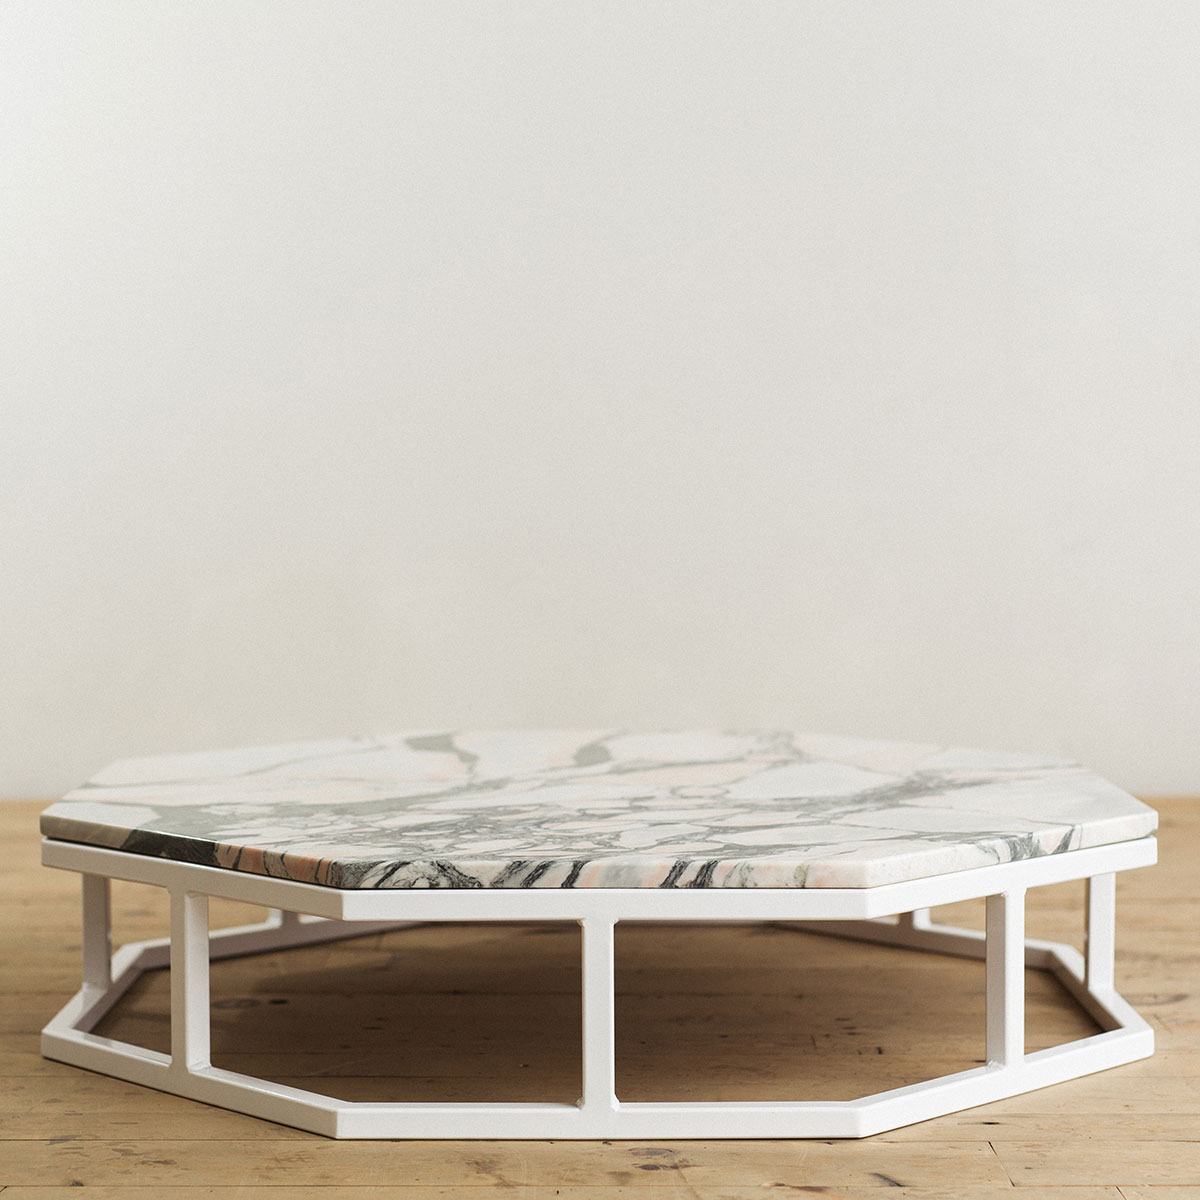 octagon-steel-marble-coffee-table-white-2